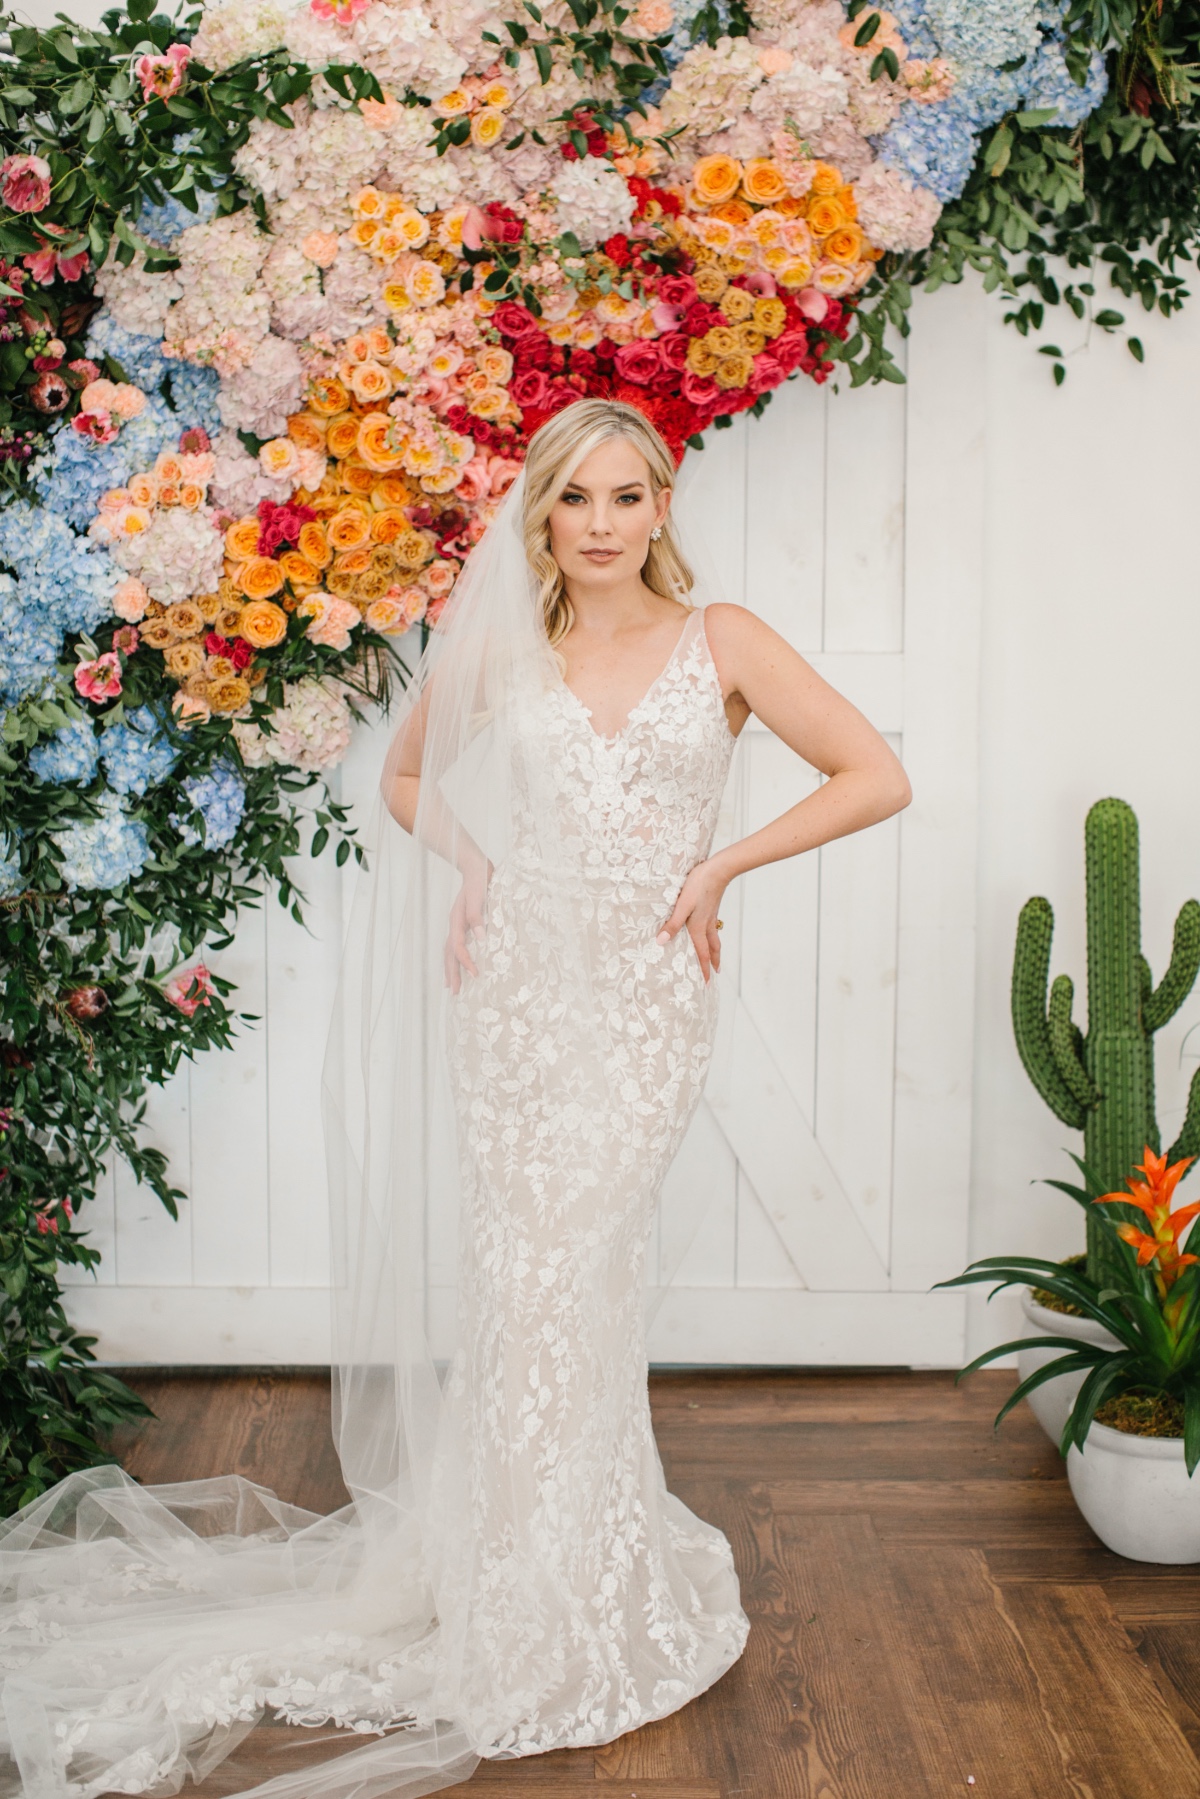 Lace wedding gown in front rainbow floral backdrop